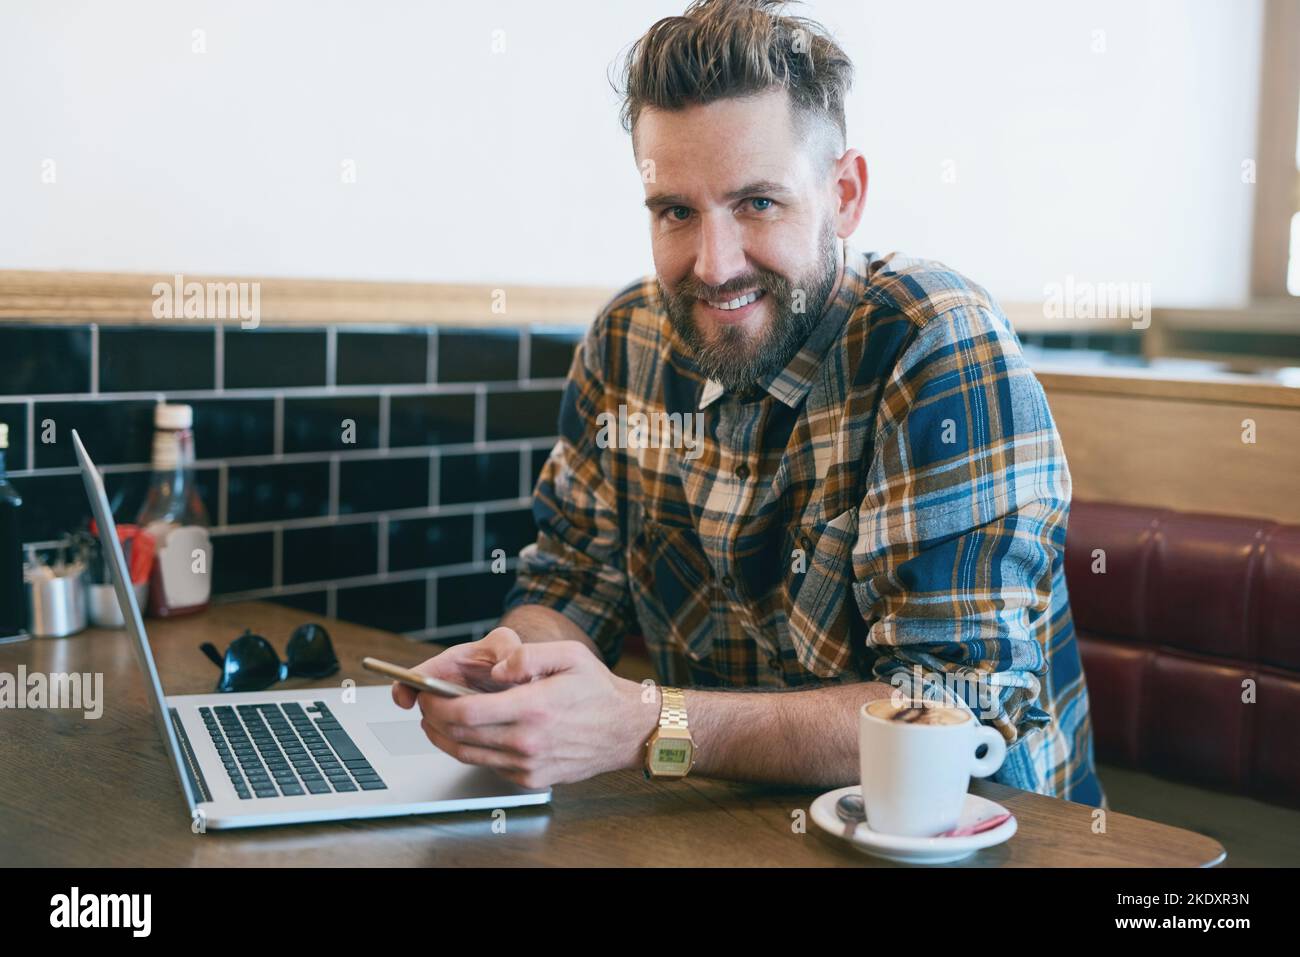 Caffeine and connectivity. Portrait of a young man using his cellphone and laptop while sitting in a cafe. Stock Photo